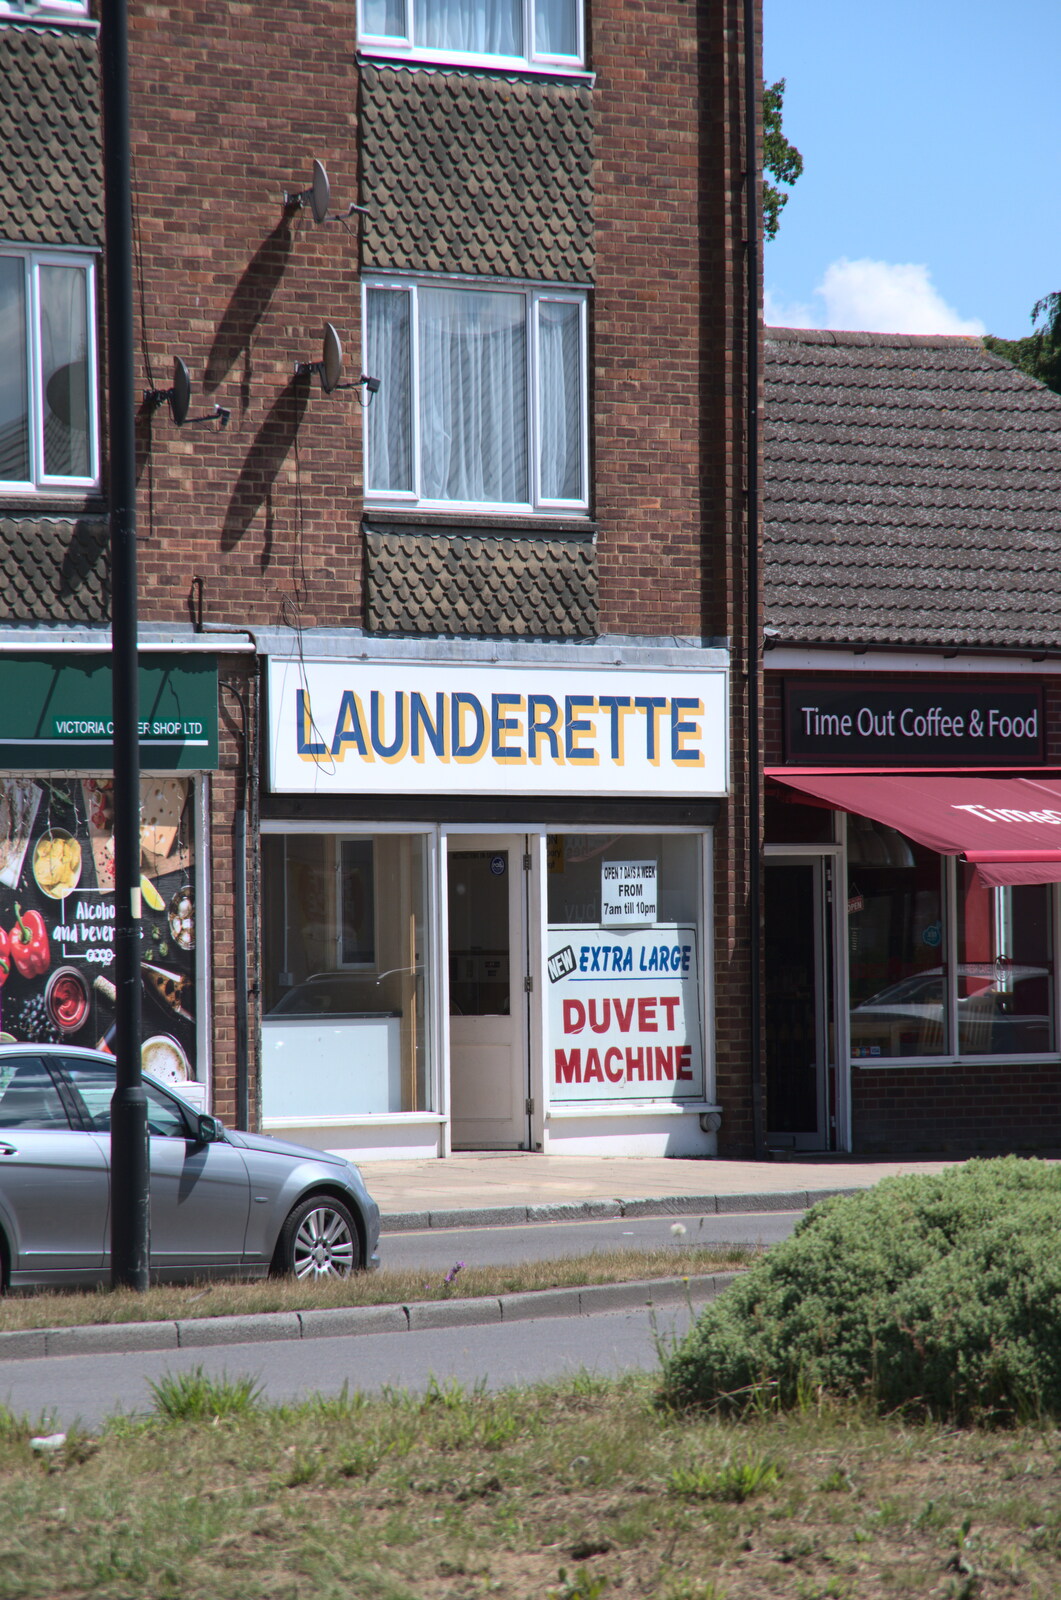 The Diss Launderette - the most exciting place around from A Return to Southwold, Suffolk - 14th June 2020